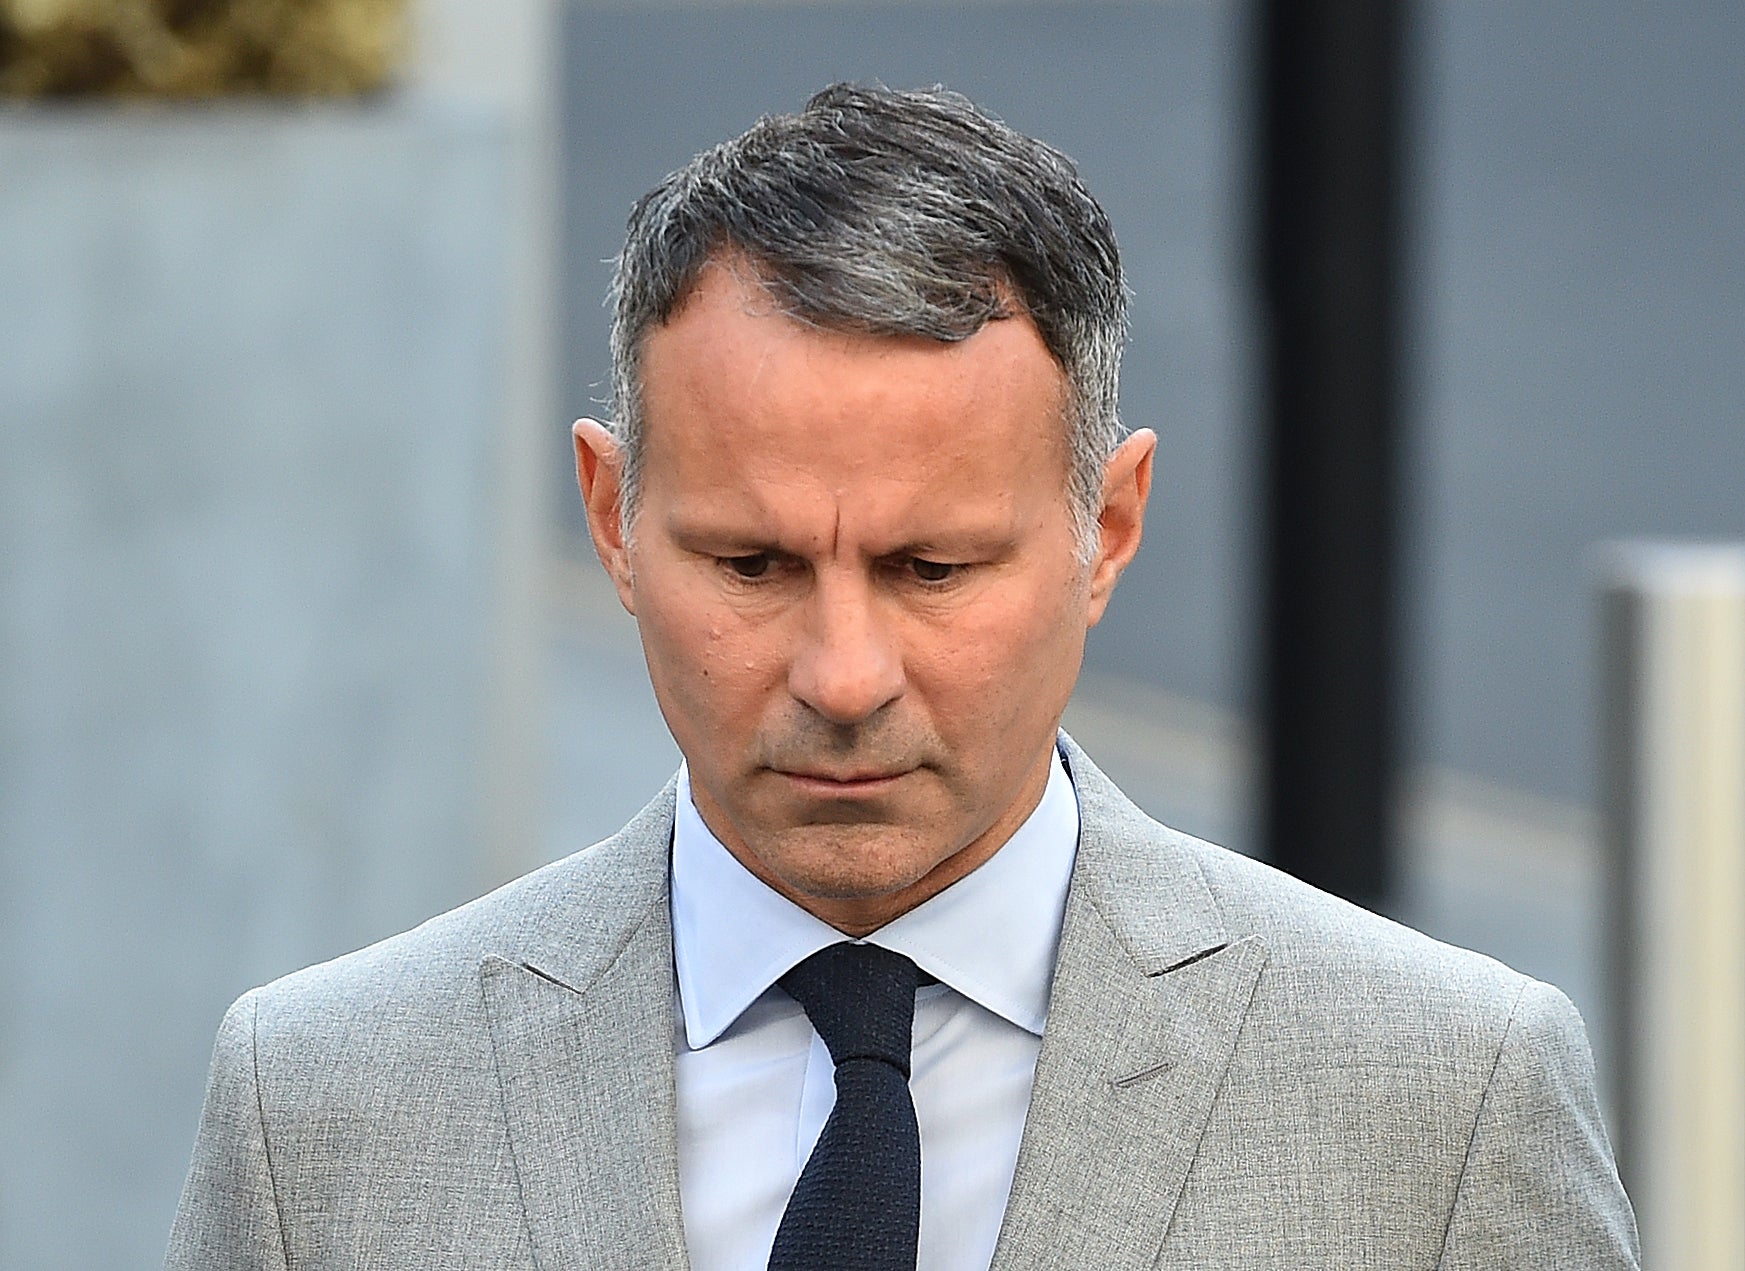 Ryan Giggs will face a re-trial over allegations of domestic violence (Peter Powell/PA).